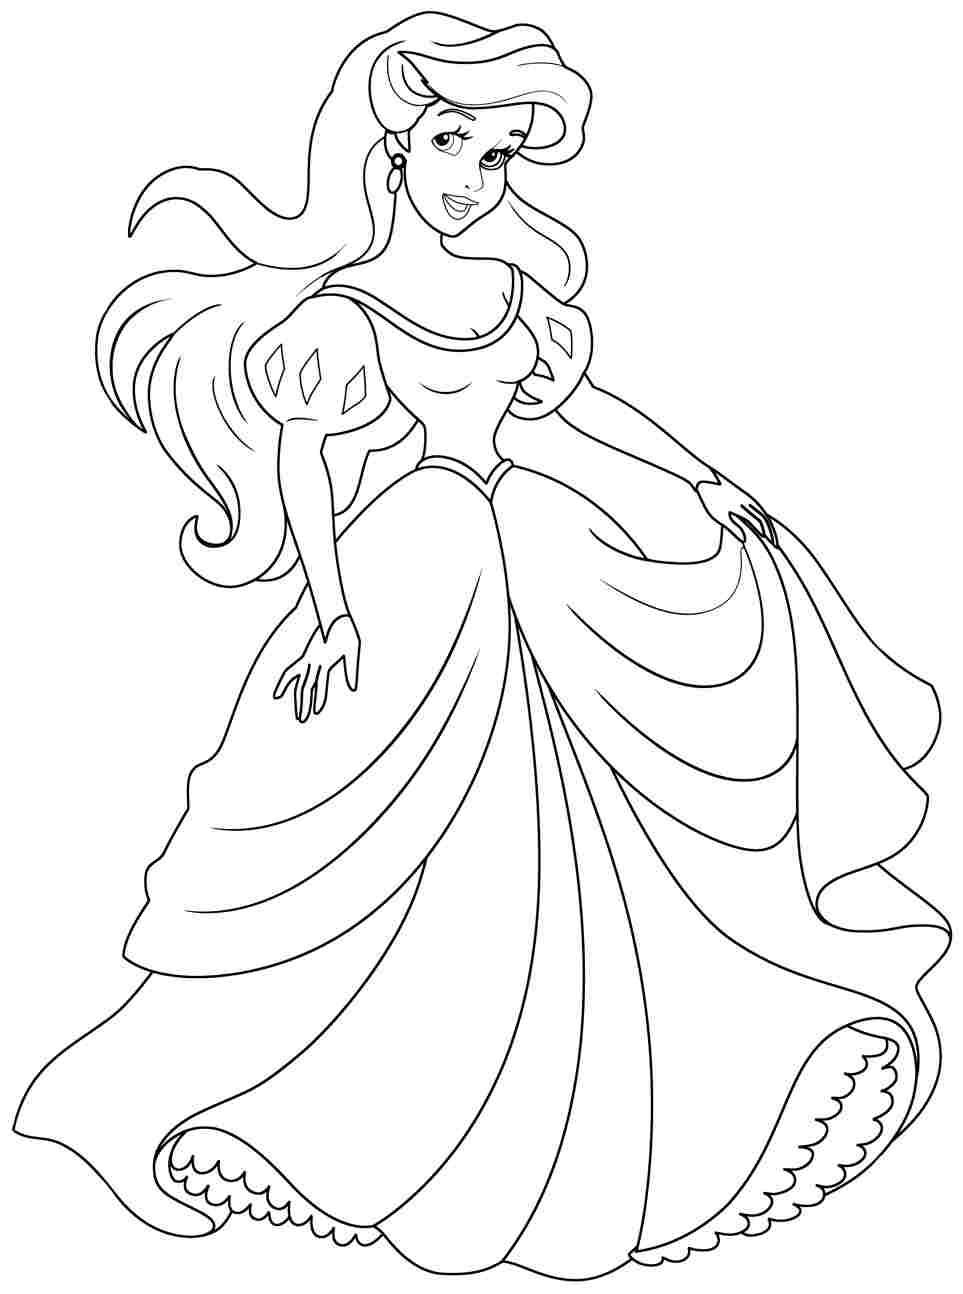 Download Full Page Princess Coloring Pages - Coloring Home